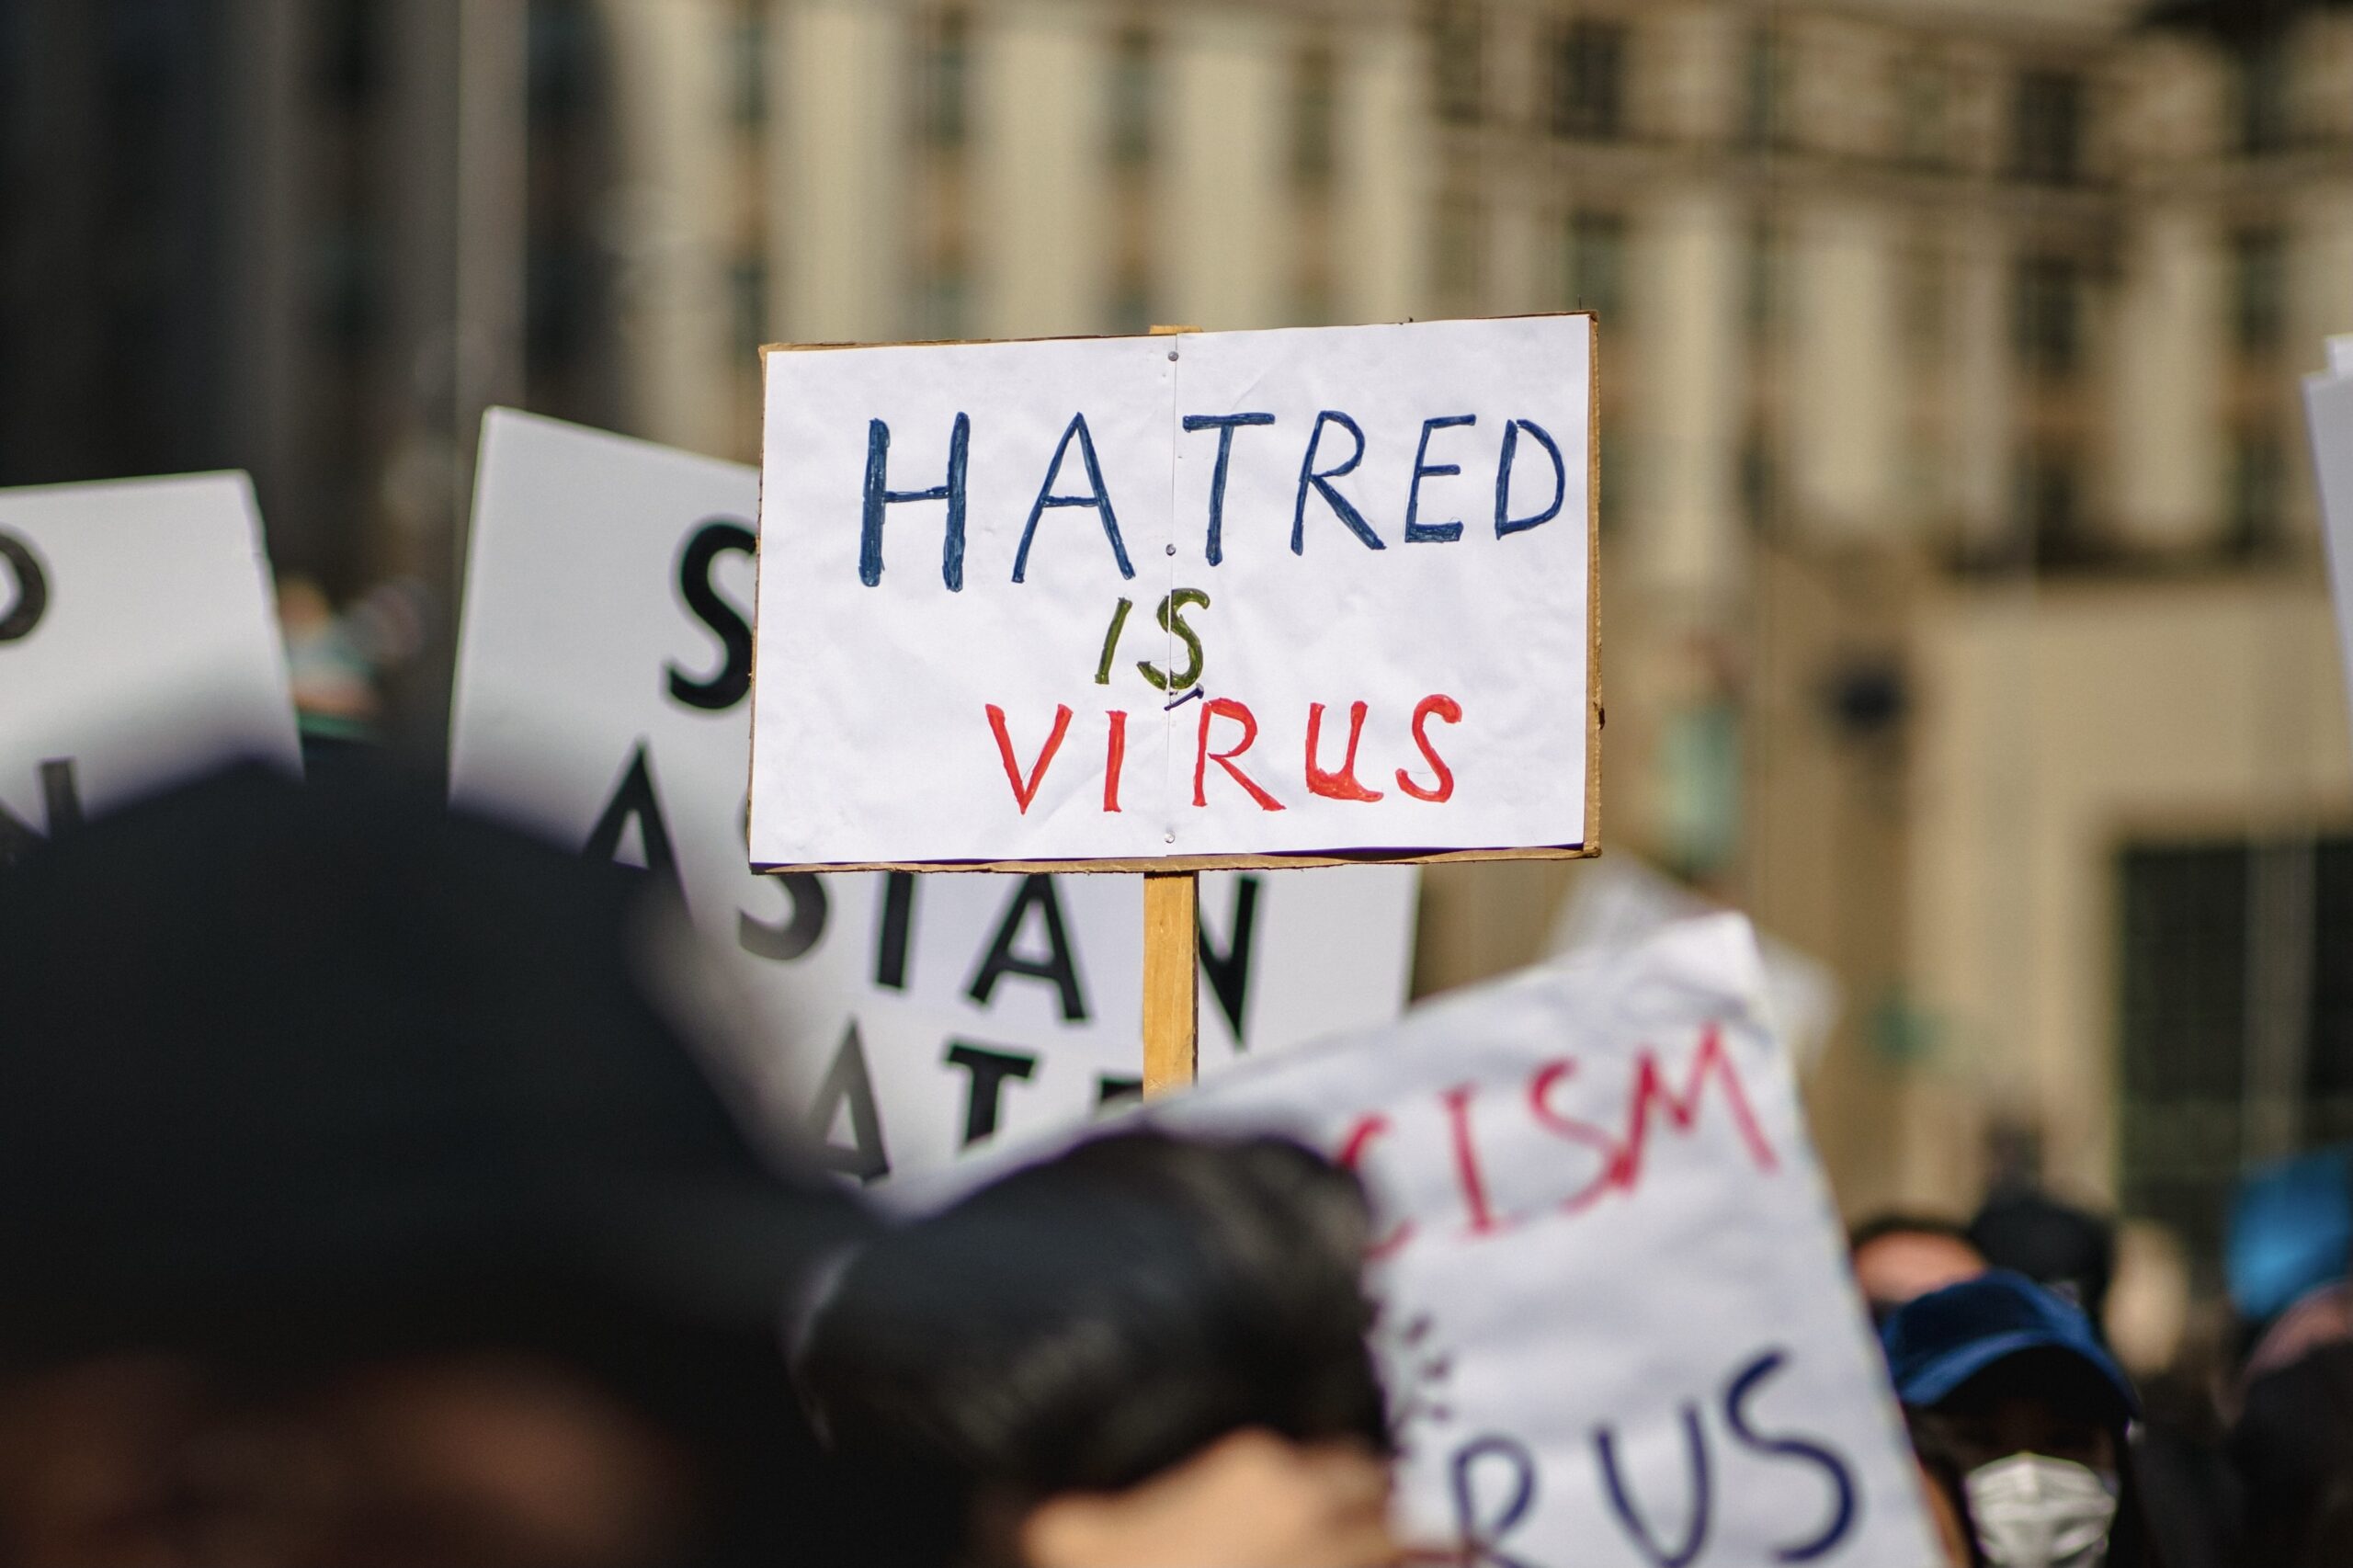 Person holding sign "Hatred is a virus"